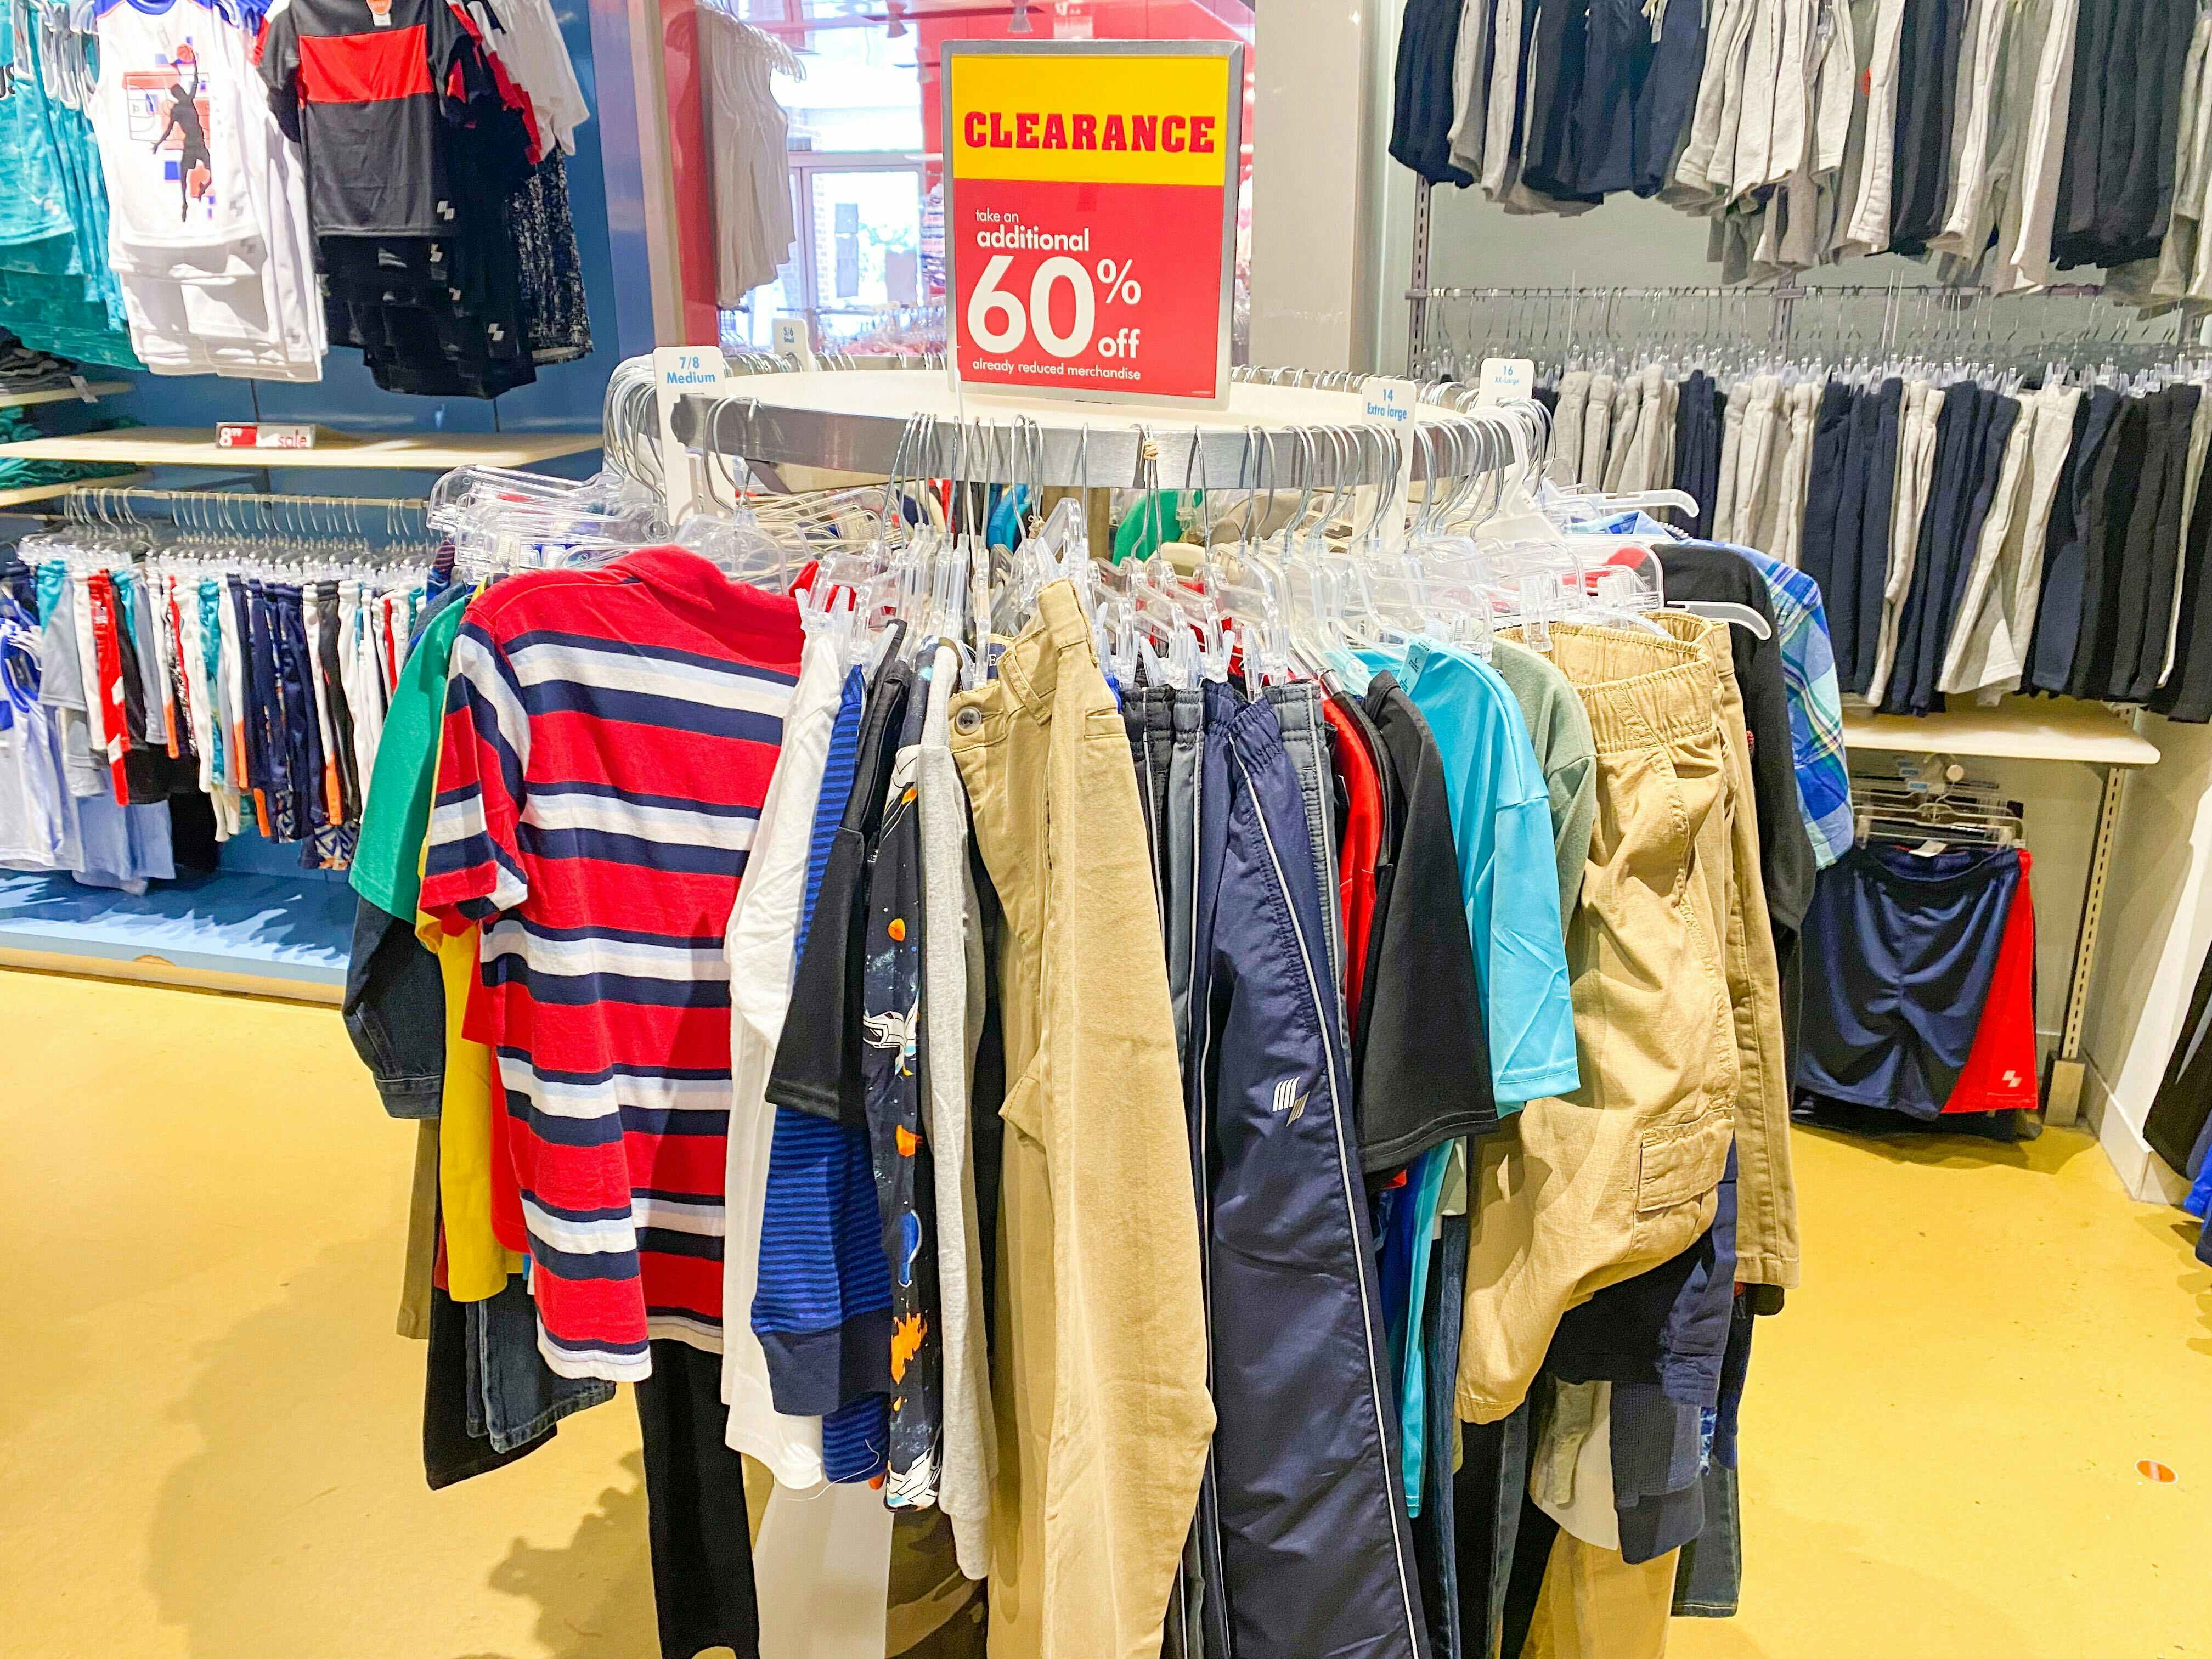 A clearance rack of kids clothing at The Childrens Place.